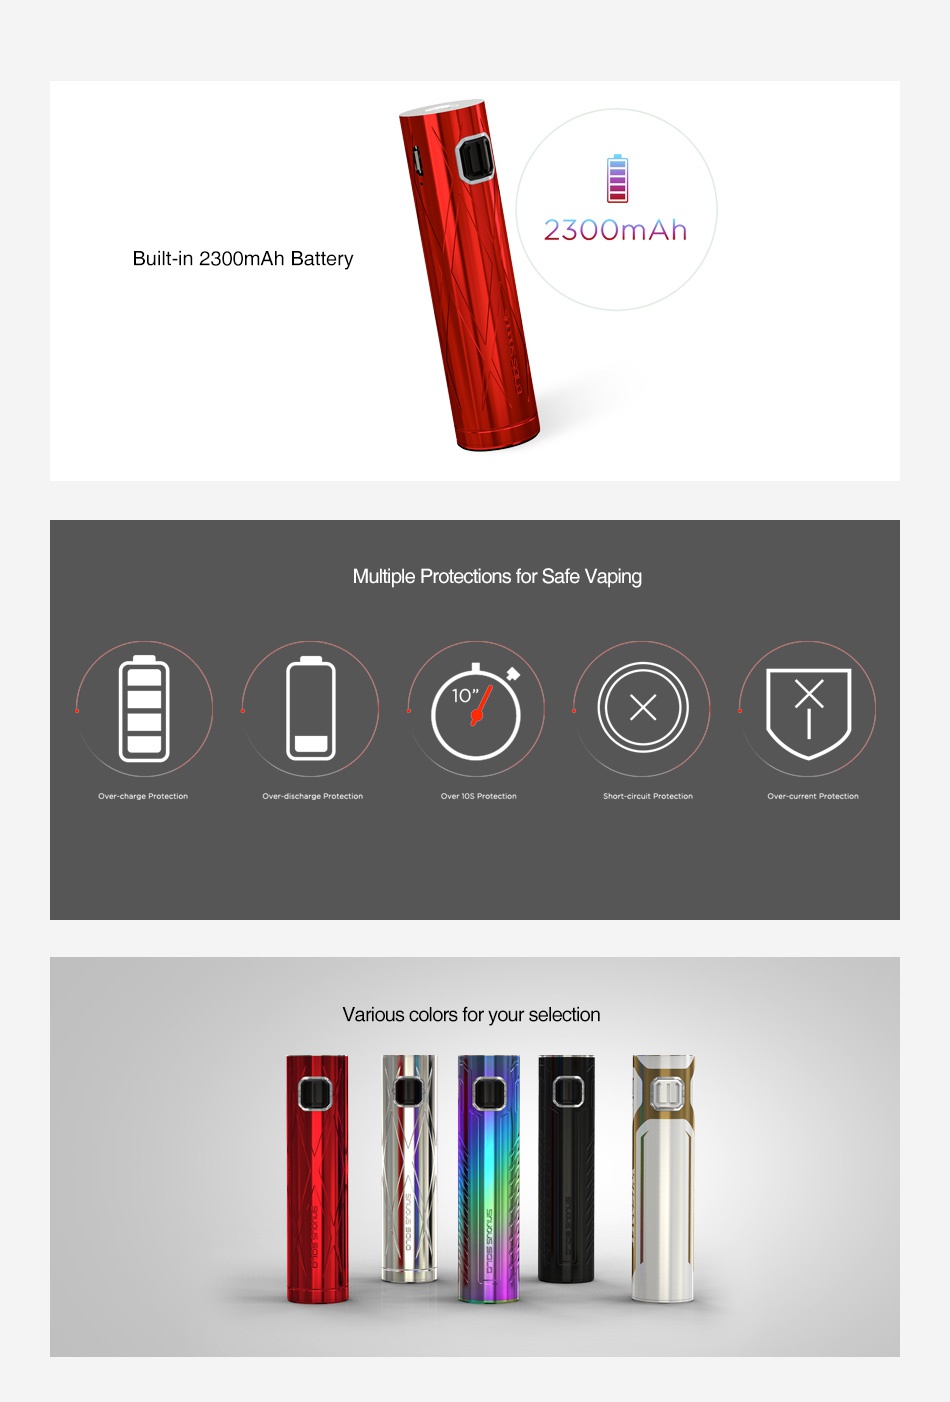 WISMEC SINUOUS SOLO Battery 2300mAh 2300mAh Built in 2300mAh Battery ltiple Protections for Safe Vaping   Various colors for your selection